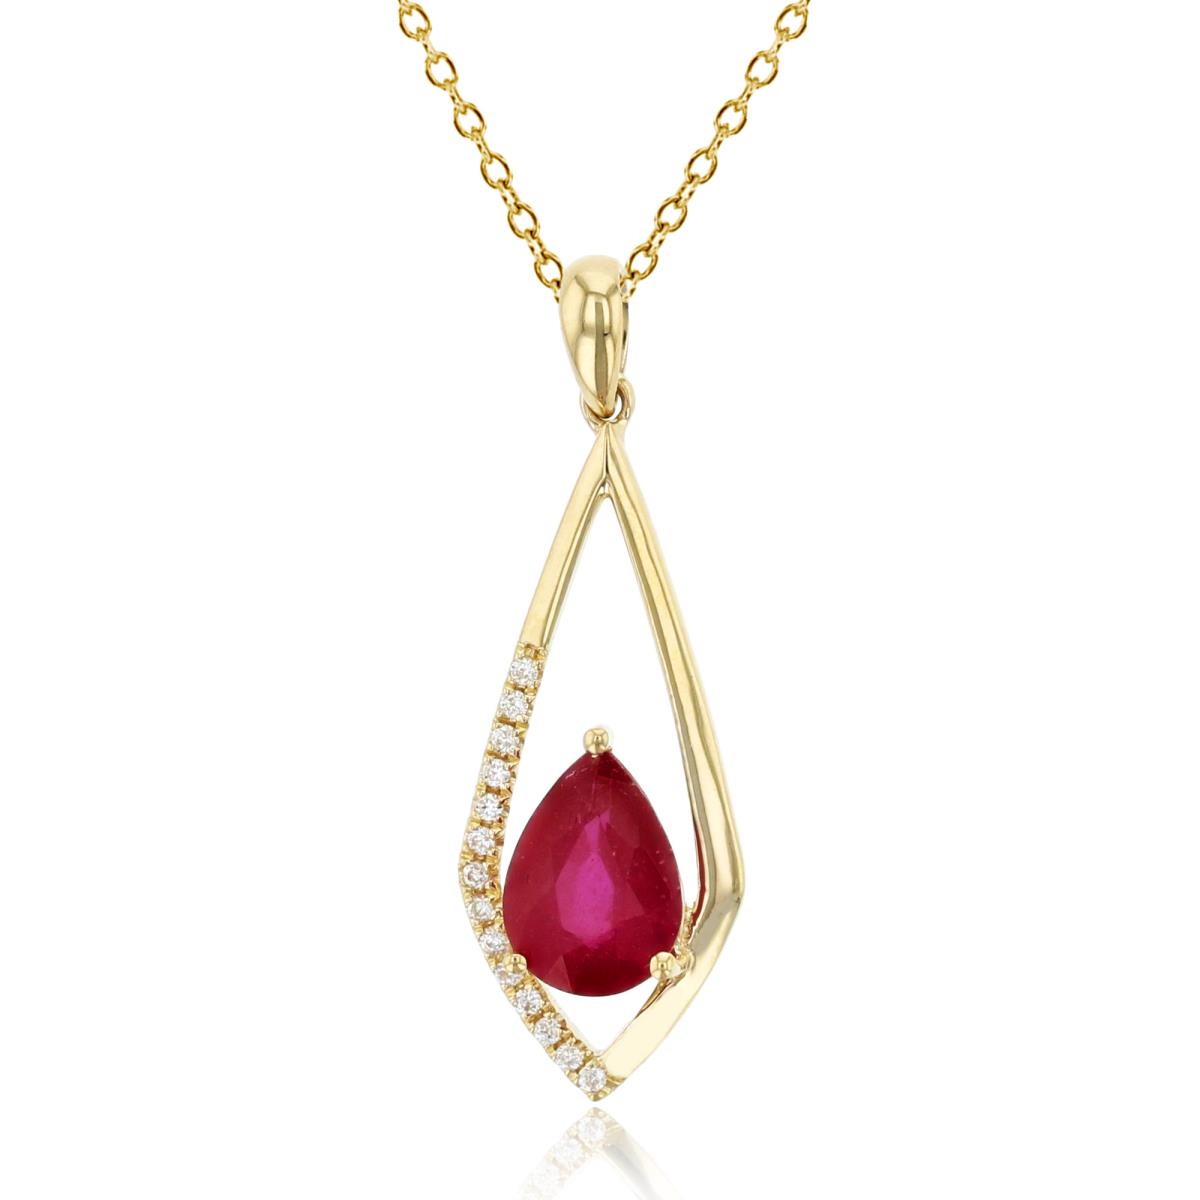 10K Yellow Gold 0.07cttw Rnd Diam & 7x5mm  Glass Filled Ruby Open Rhombus Dangling 18"Necklace